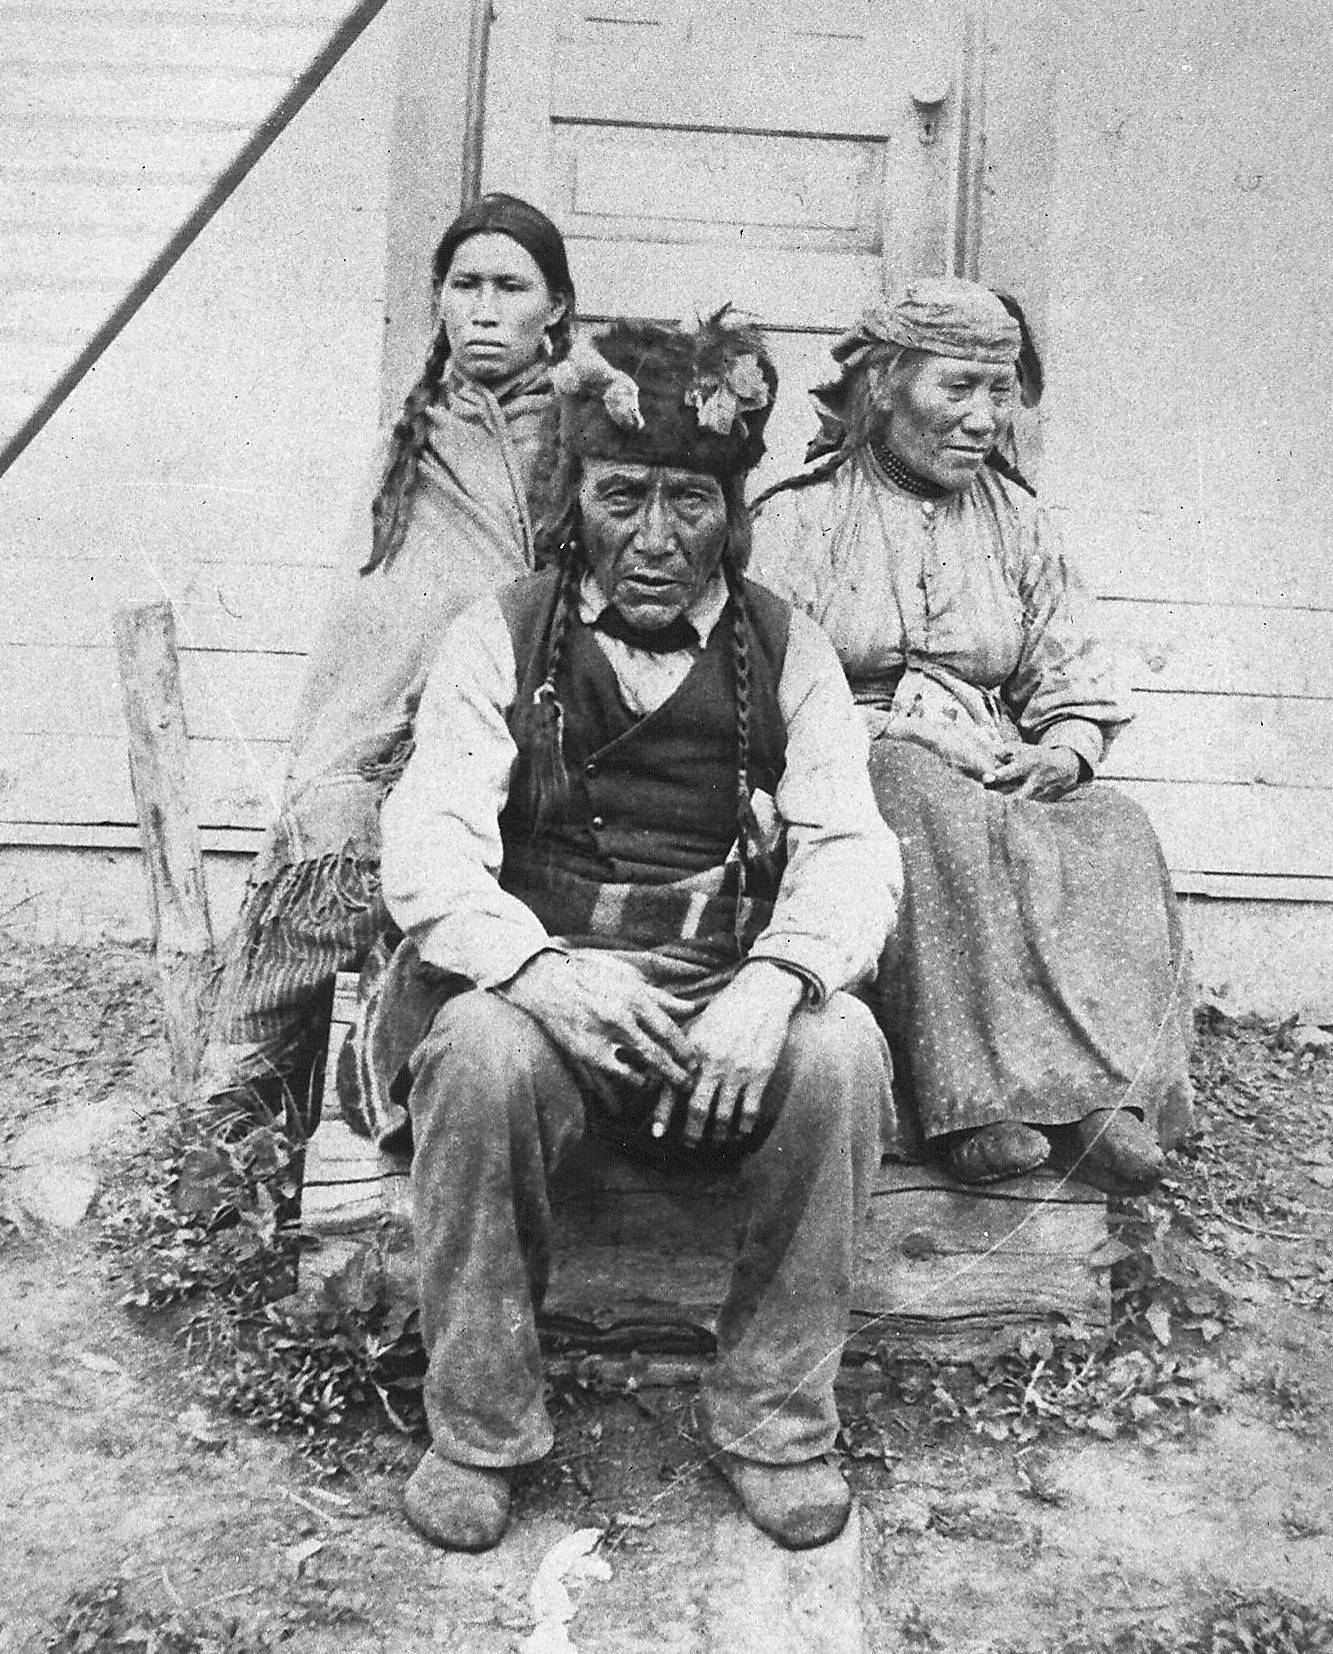 The description we have for this photo is "Chief and Family - Peace River area". If you look closely at the right hand of the man in front,it appears to be disfigured which may be helpful in identifying him! It is also possible the hand is fine and rather the image is distorted / shadowed due to rudimentary photography.
2015.27.29 / Nugent, Mike

---EDIT---

This gentleman is Duncan Testawitch